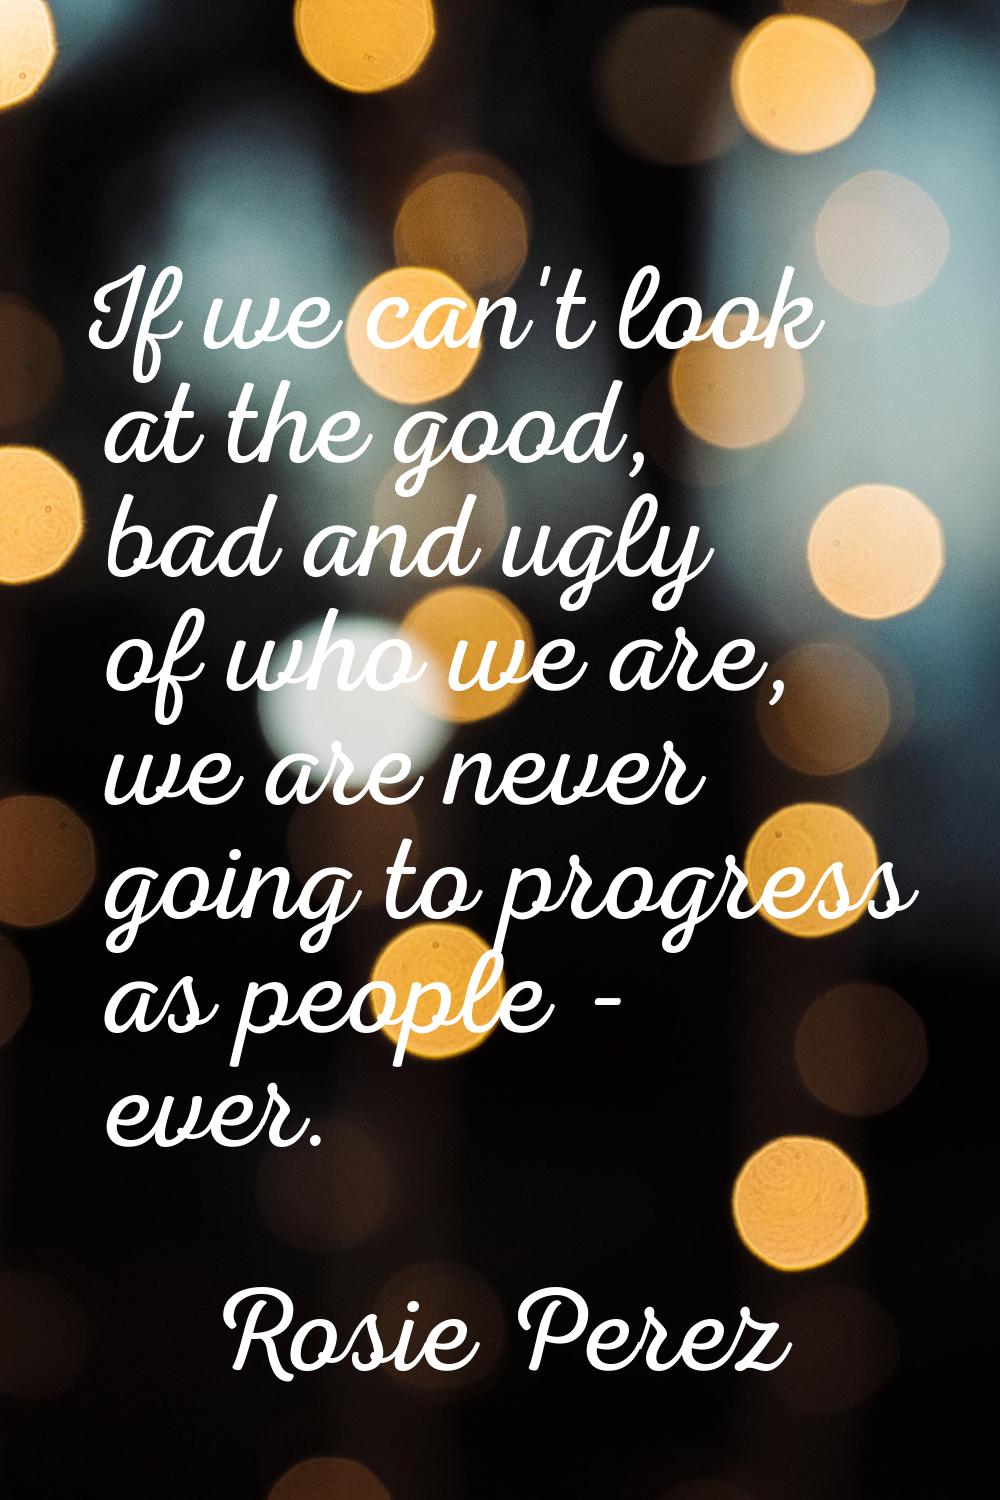 If we can't look at the good, bad and ugly of who we are, we are never going to progress as people 